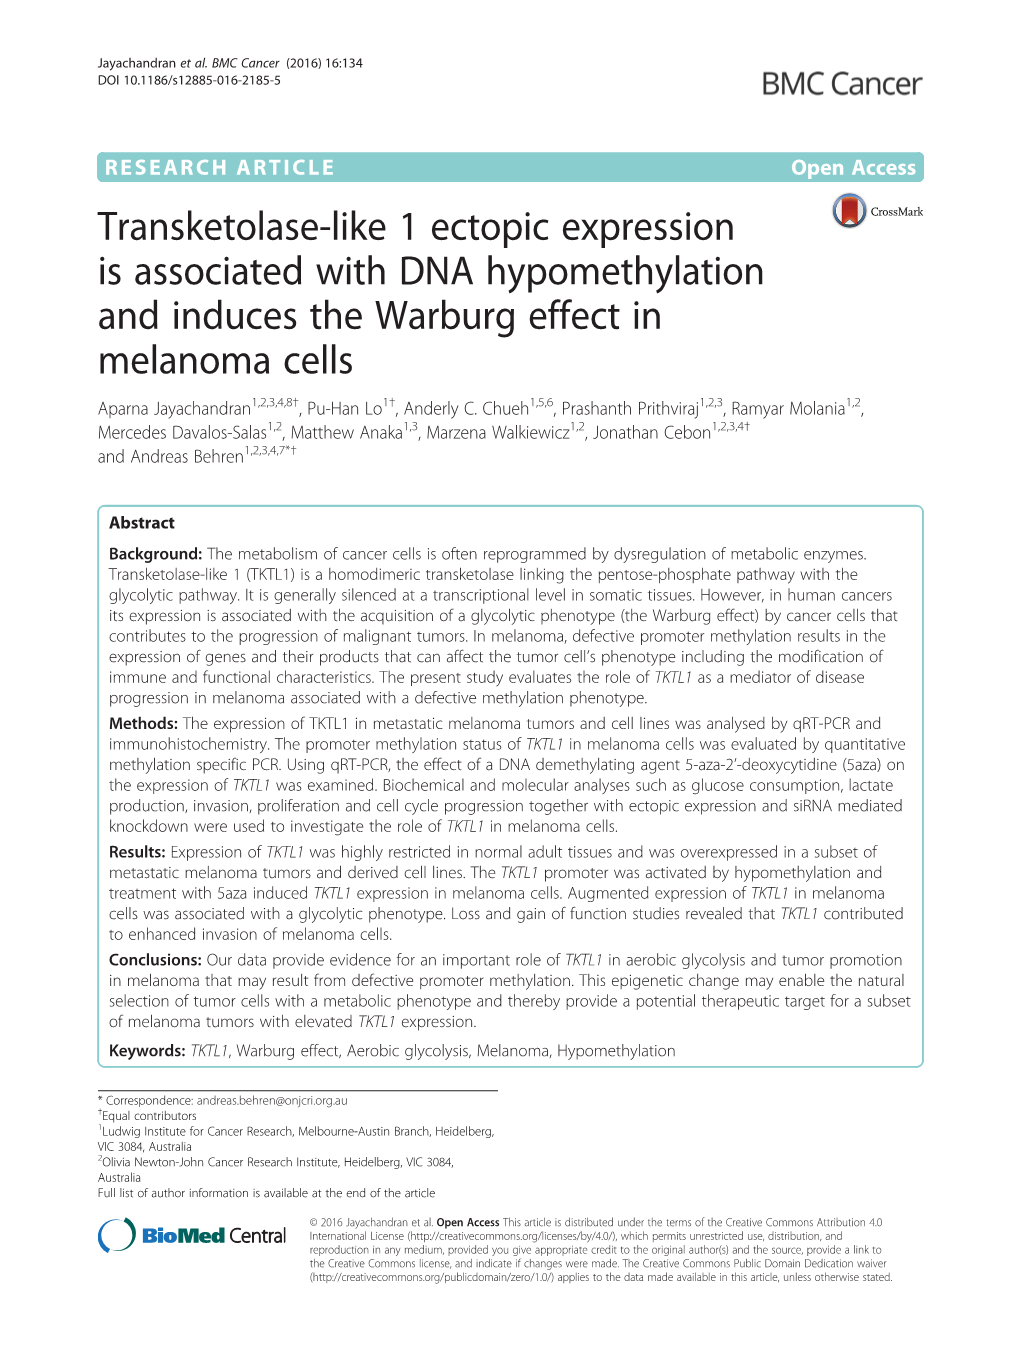 Transketolase-Like 1 Ectopic Expression Is Associated with DNA